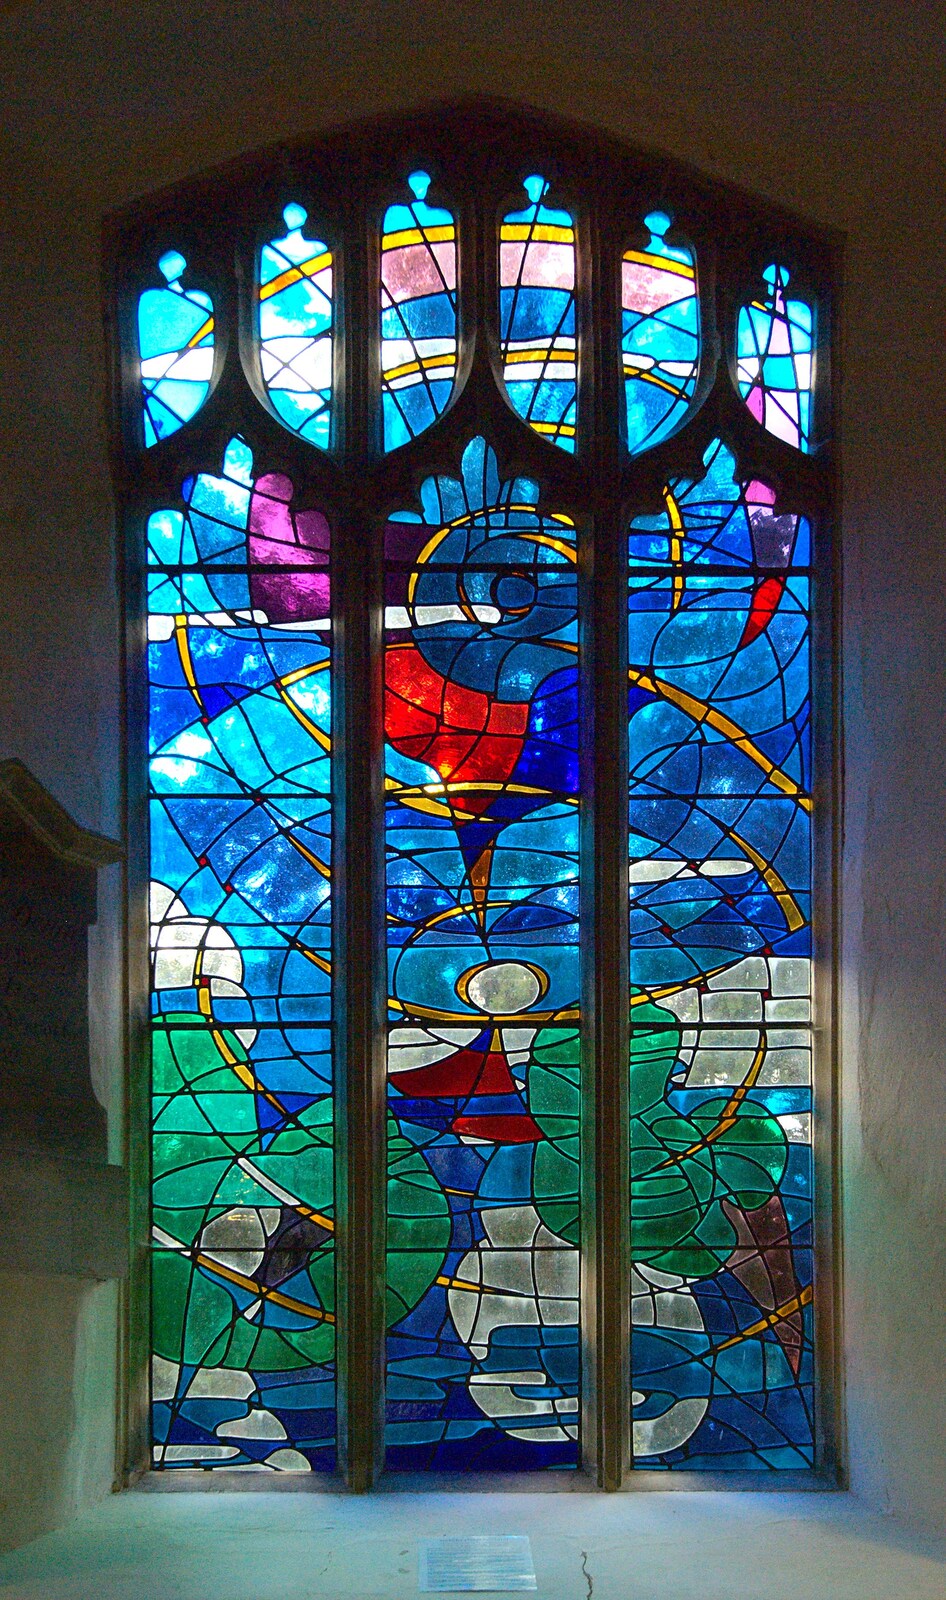 A striking modern stained glass window from Fred's First Nativity, St. Peter's Church, Palgrave, Suffolk - 8th December 2011